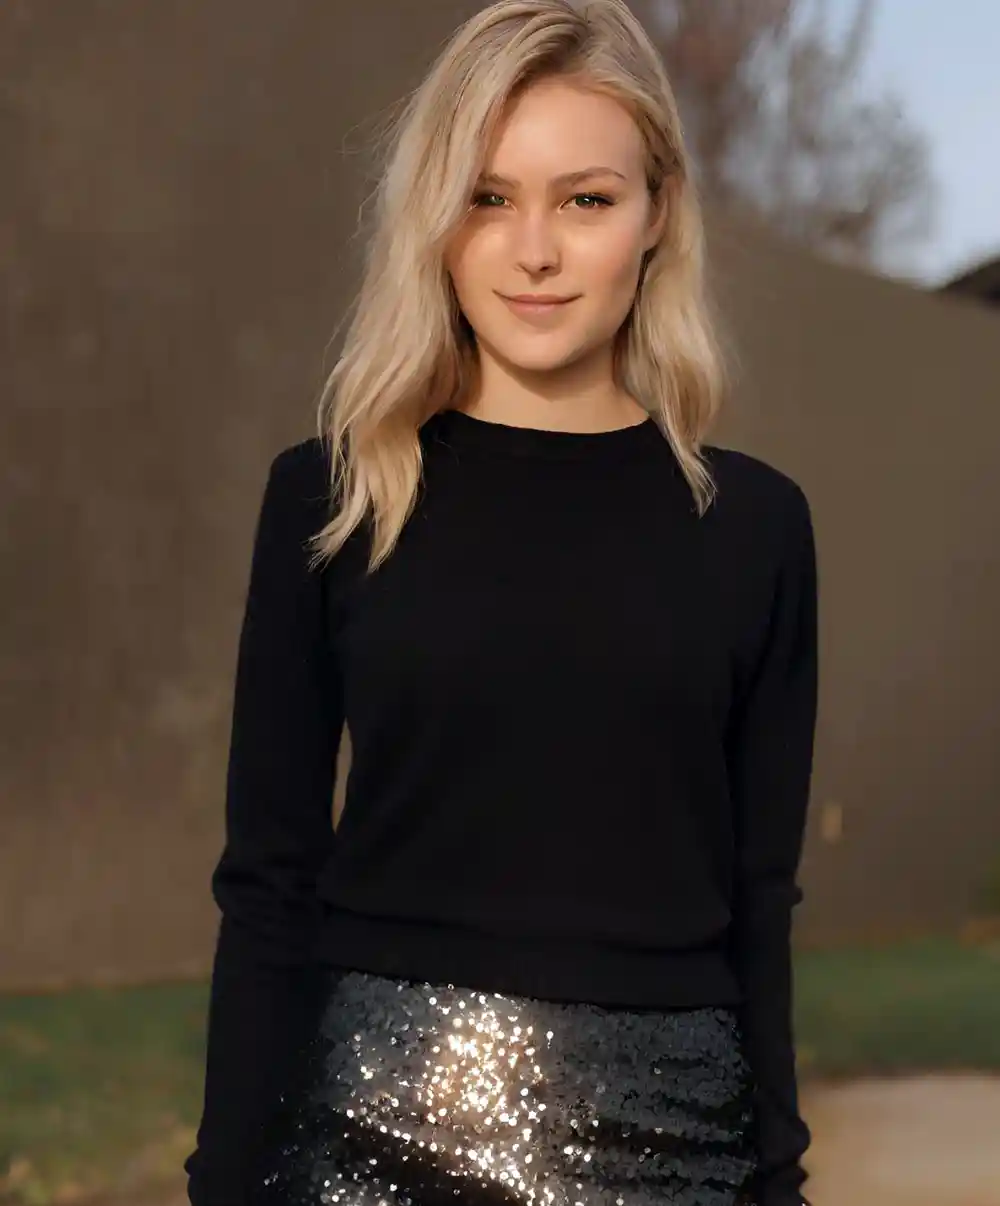 Girl wearing a black sweater with a sequin skirt